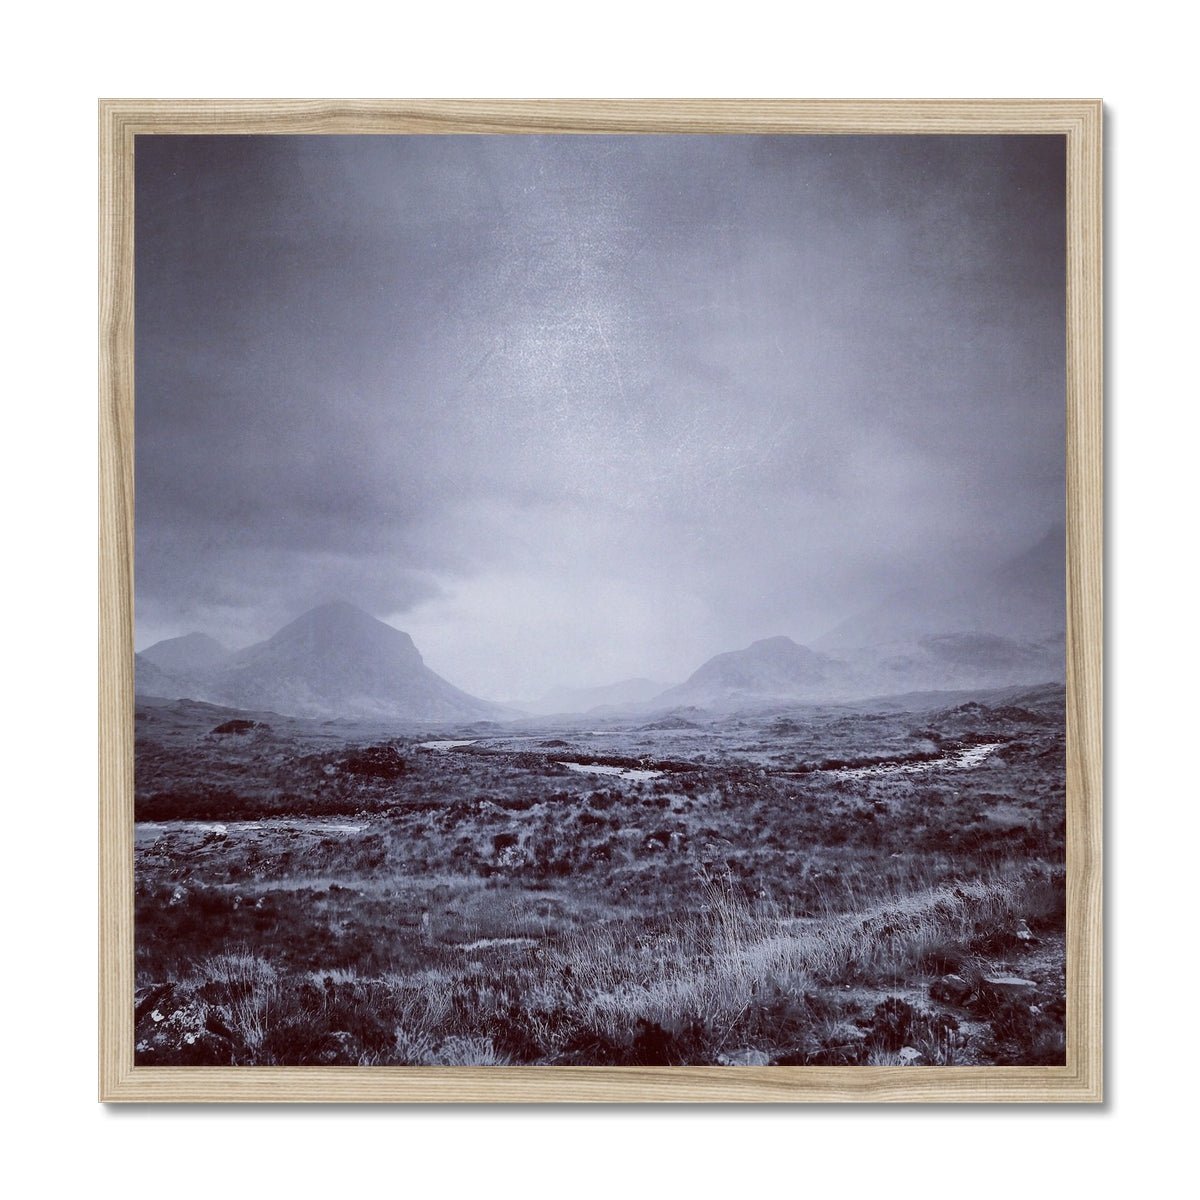 The Brooding Cuillin Skye Painting | Framed Prints From Scotland-Framed Prints-Skye Art Gallery-20"x20"-Natural Frame-Paintings, Prints, Homeware, Art Gifts From Scotland By Scottish Artist Kevin Hunter